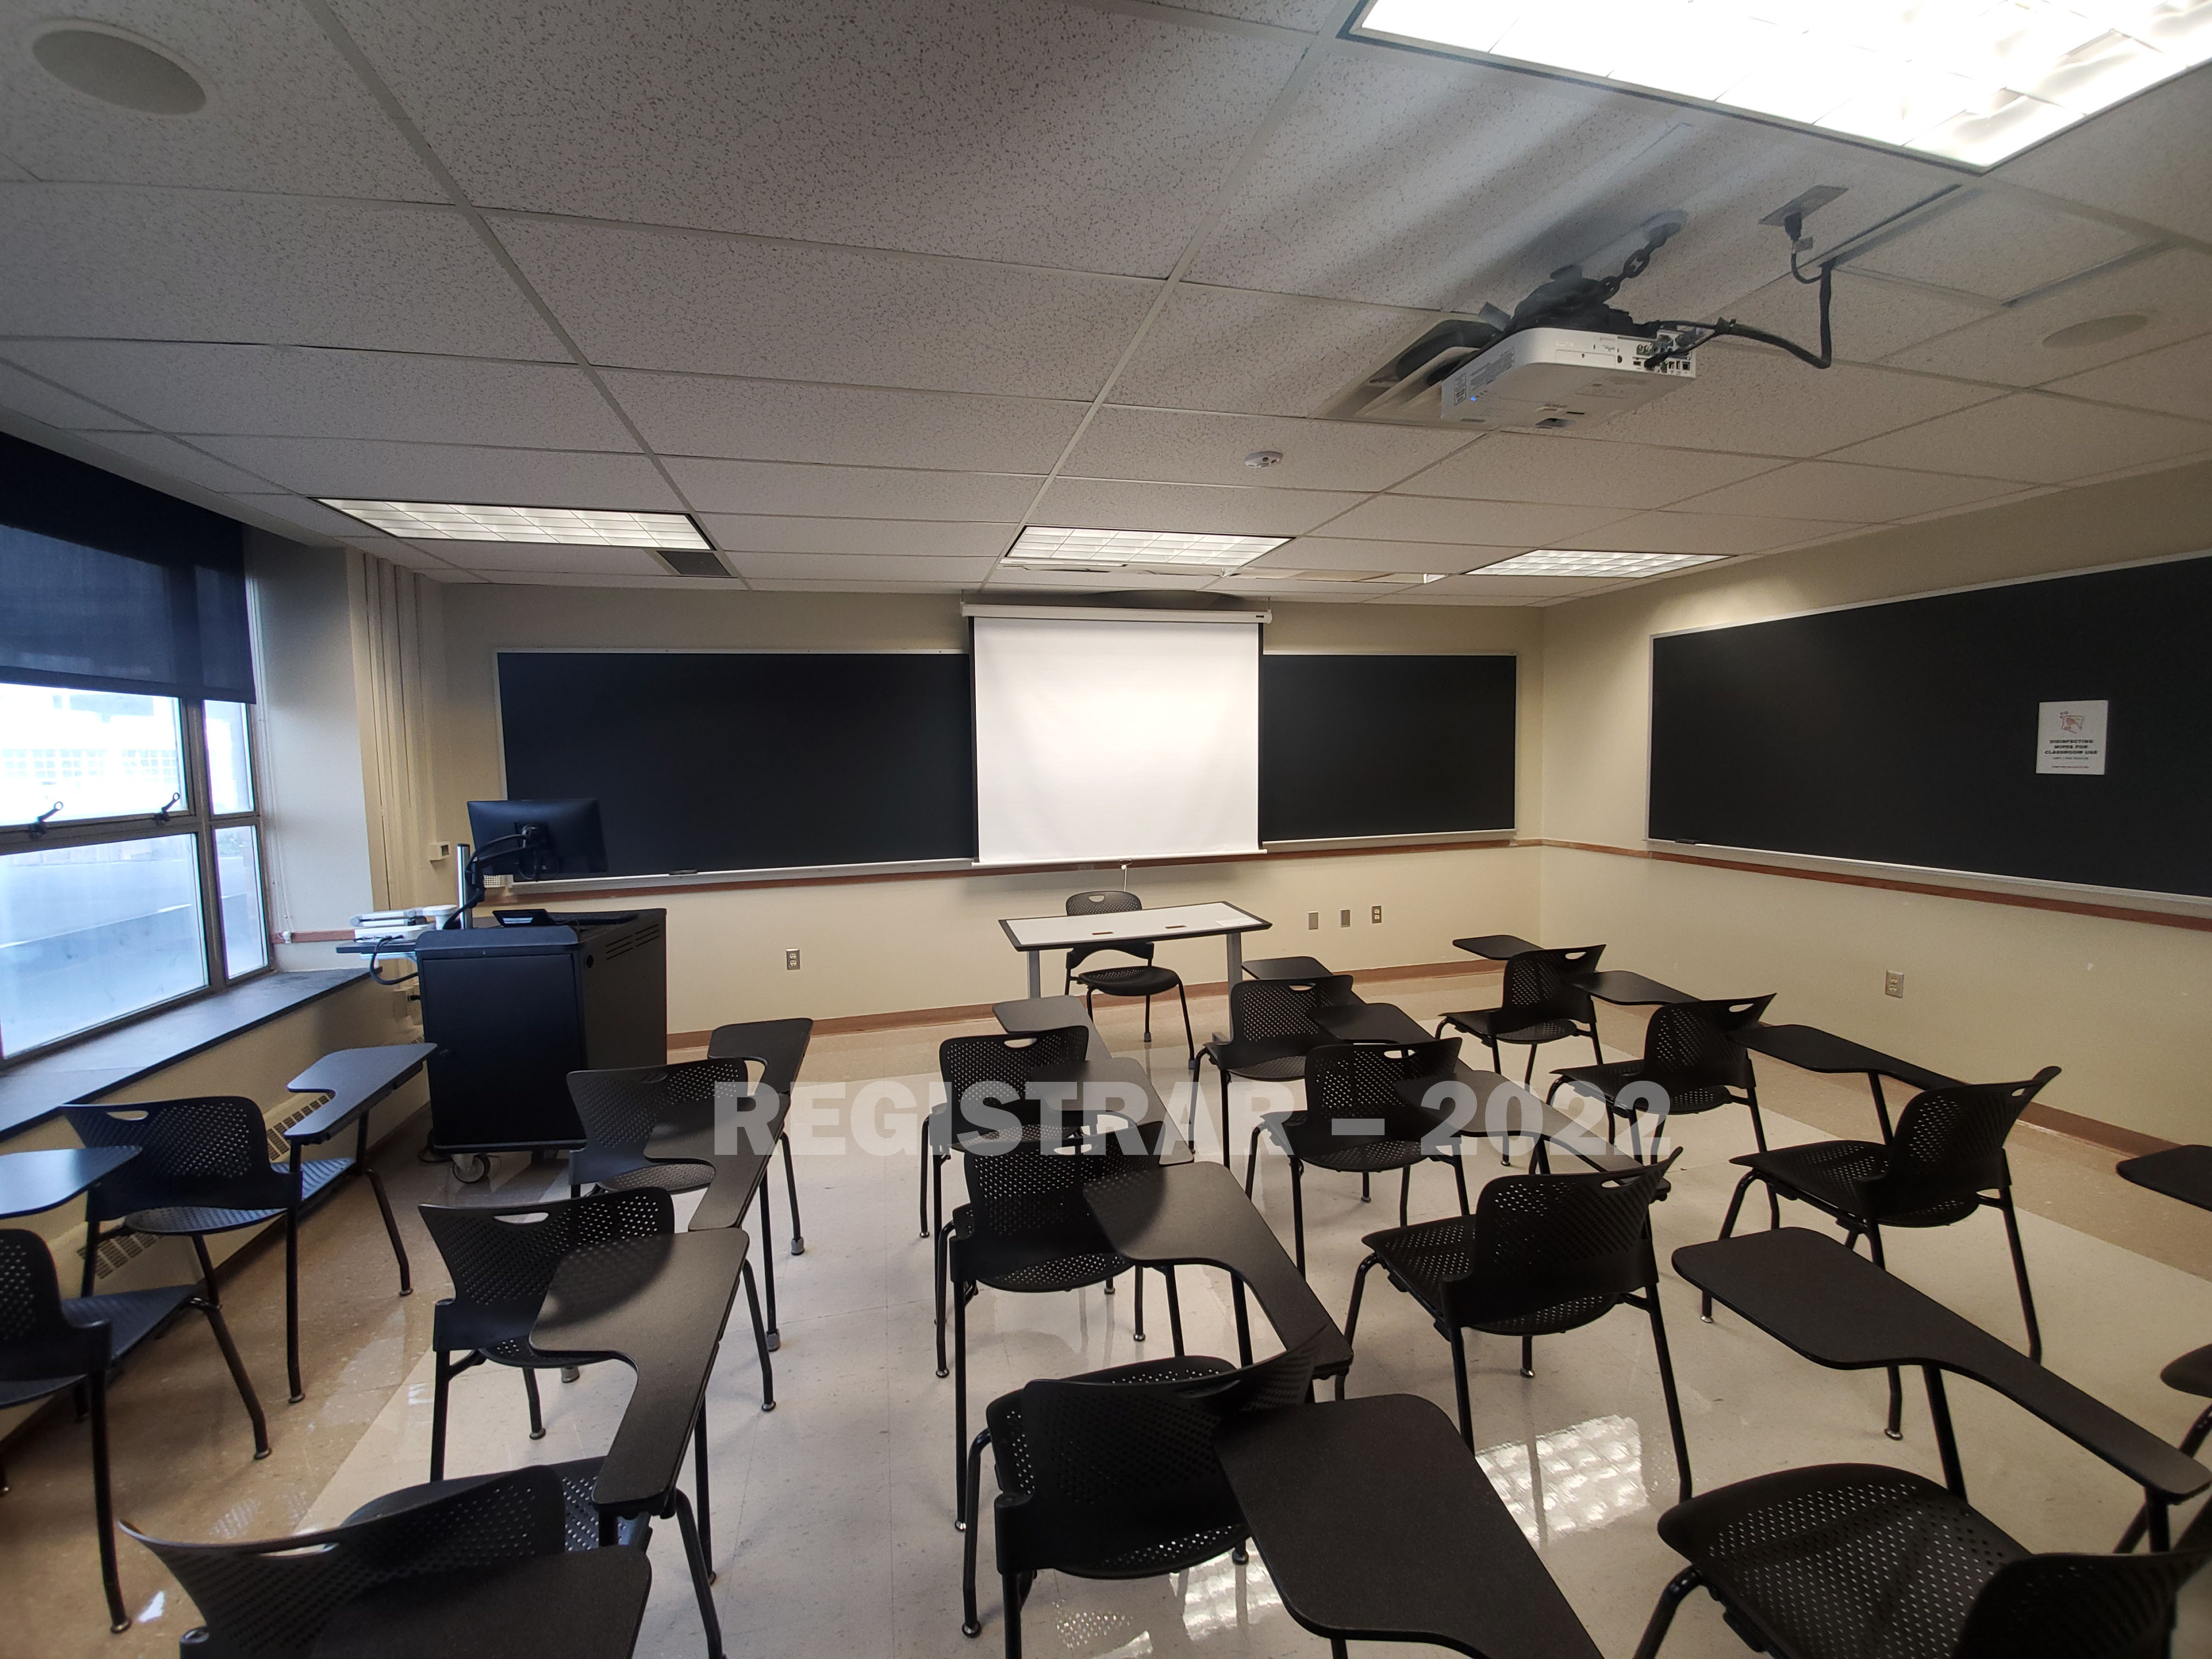 Enarson Classroom Building room 246 ultra wide angle view from the back of the room with projector screen down